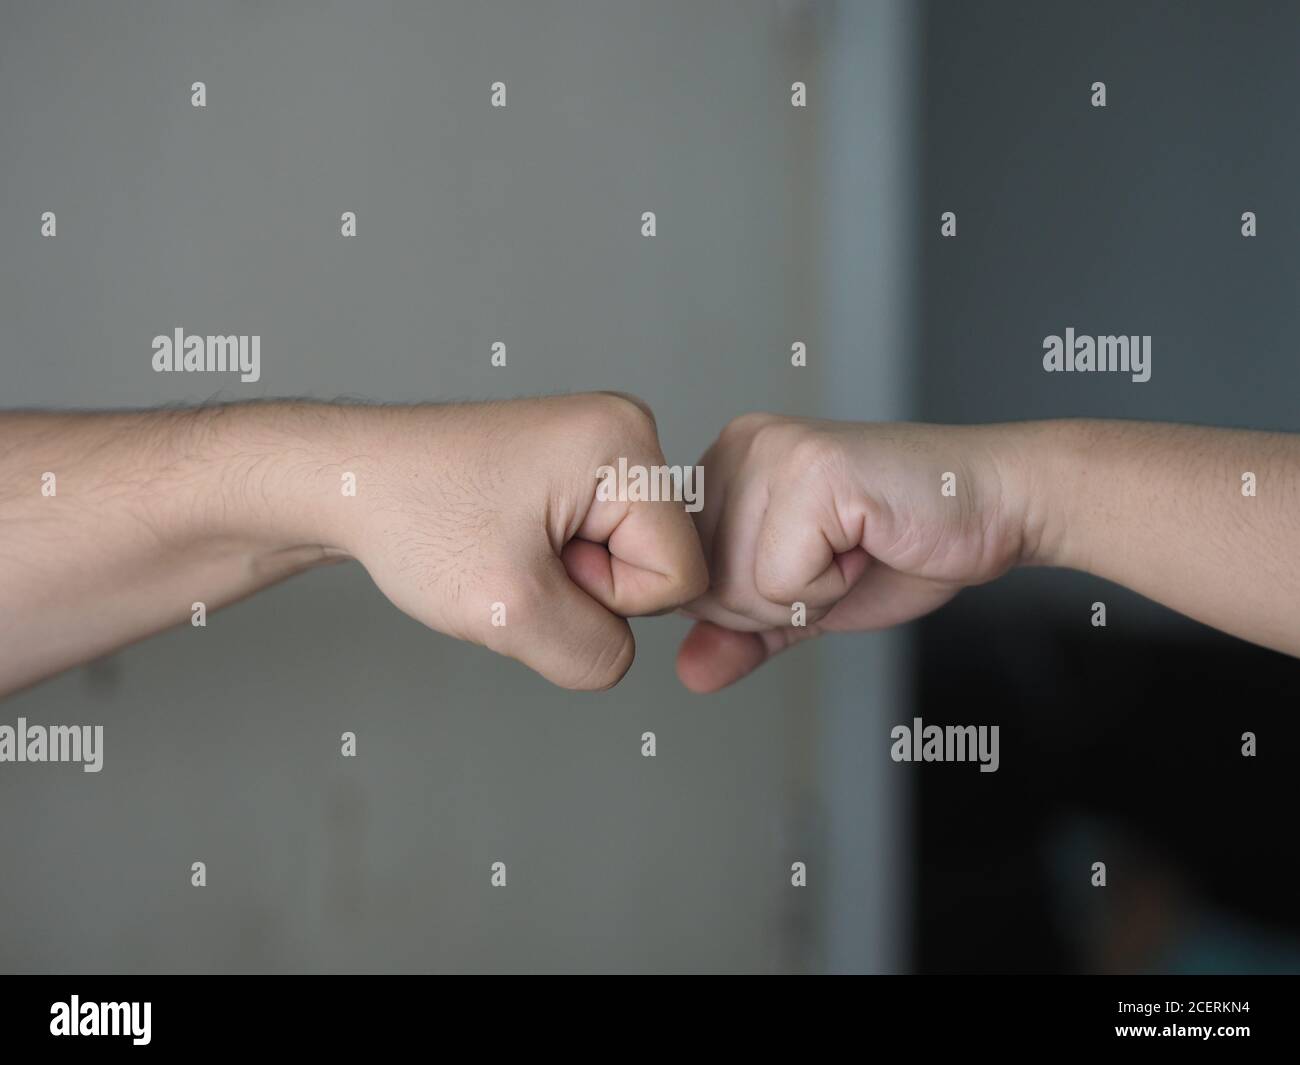 Two Woman Alternative Handshakes Fist Collision Bump Greeting In The 